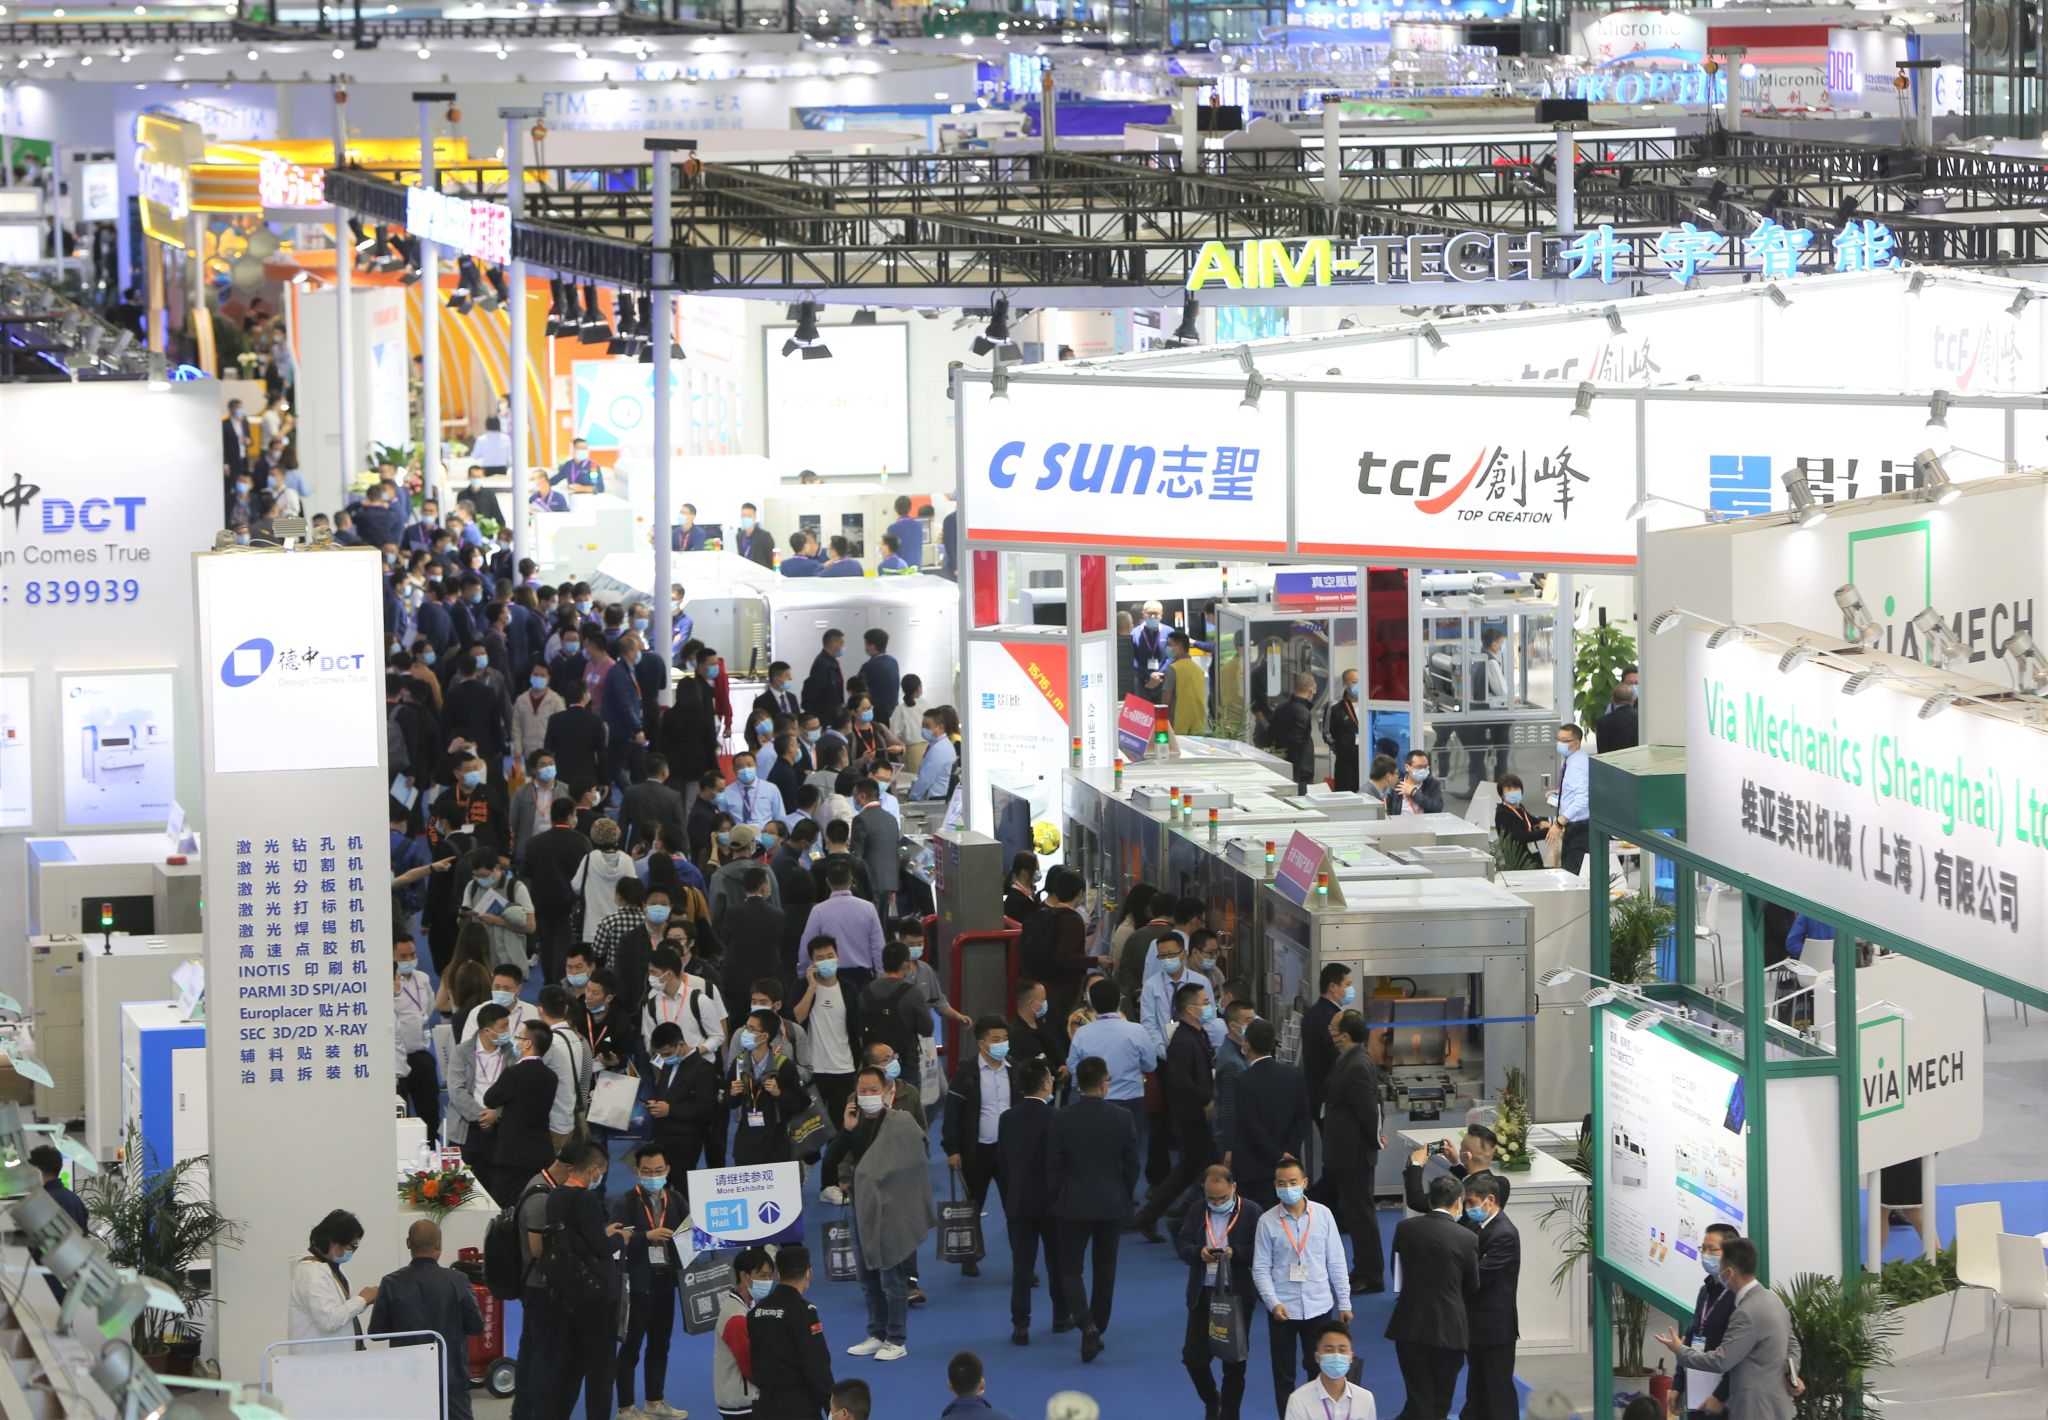 Tarsus Group has today announced that it has entered into a partnership with the association organisers of the International Electronics Circuit Exhibition (Shenzhen) to jointly produce the world's leading printed circuit board event from 2022 onwards. Module Image